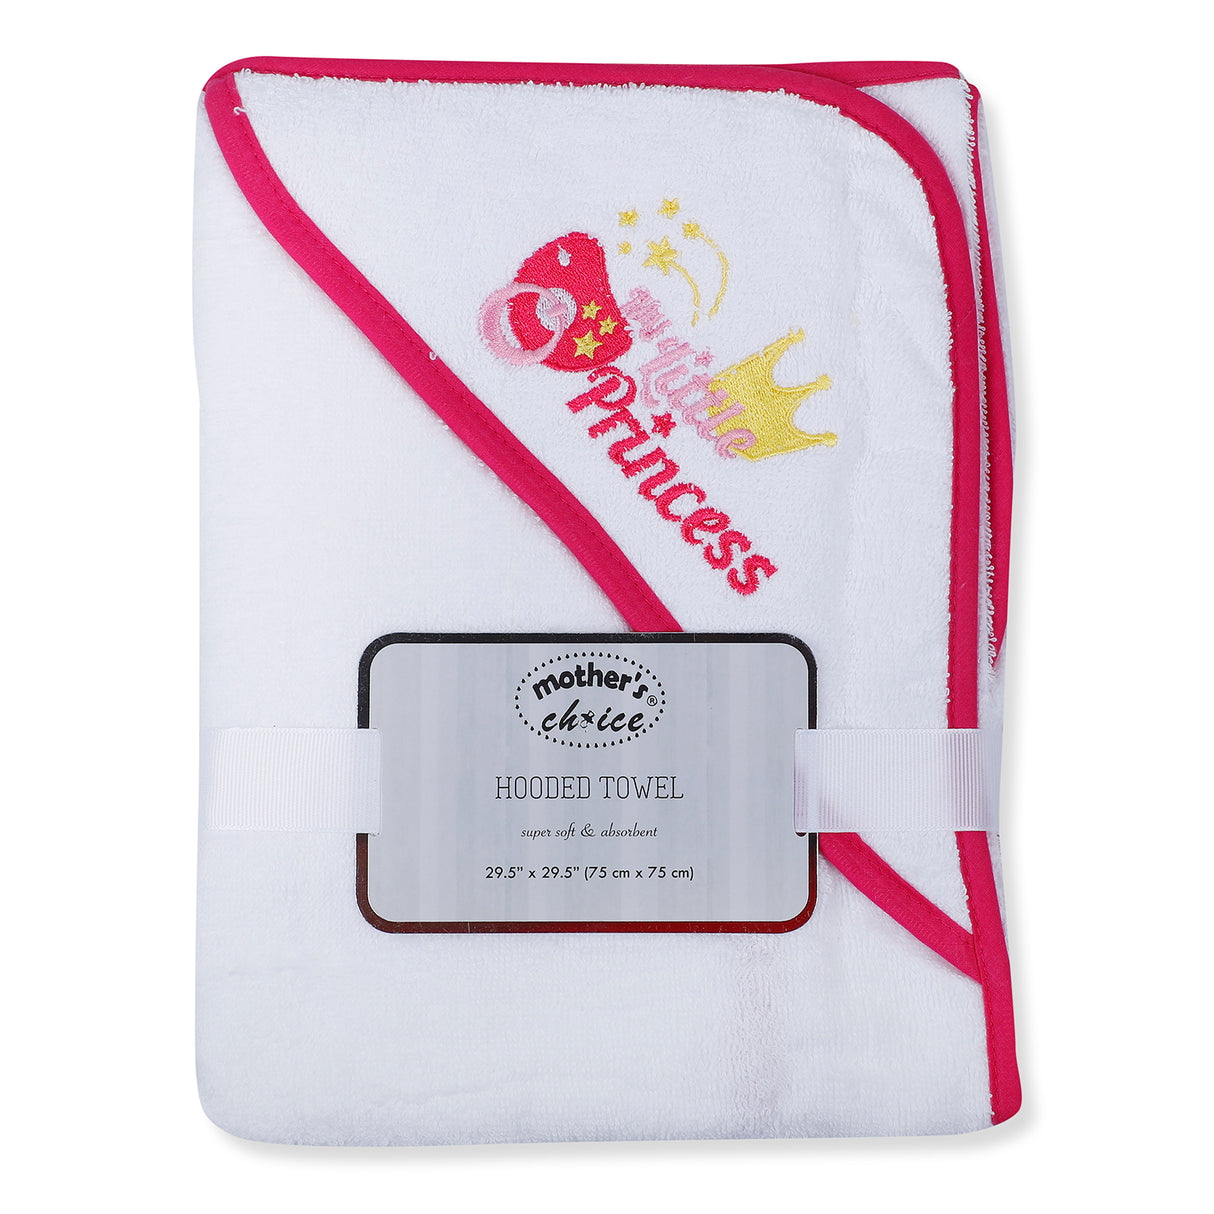 Mother's Choice Embroidered Hooded Bath Towel